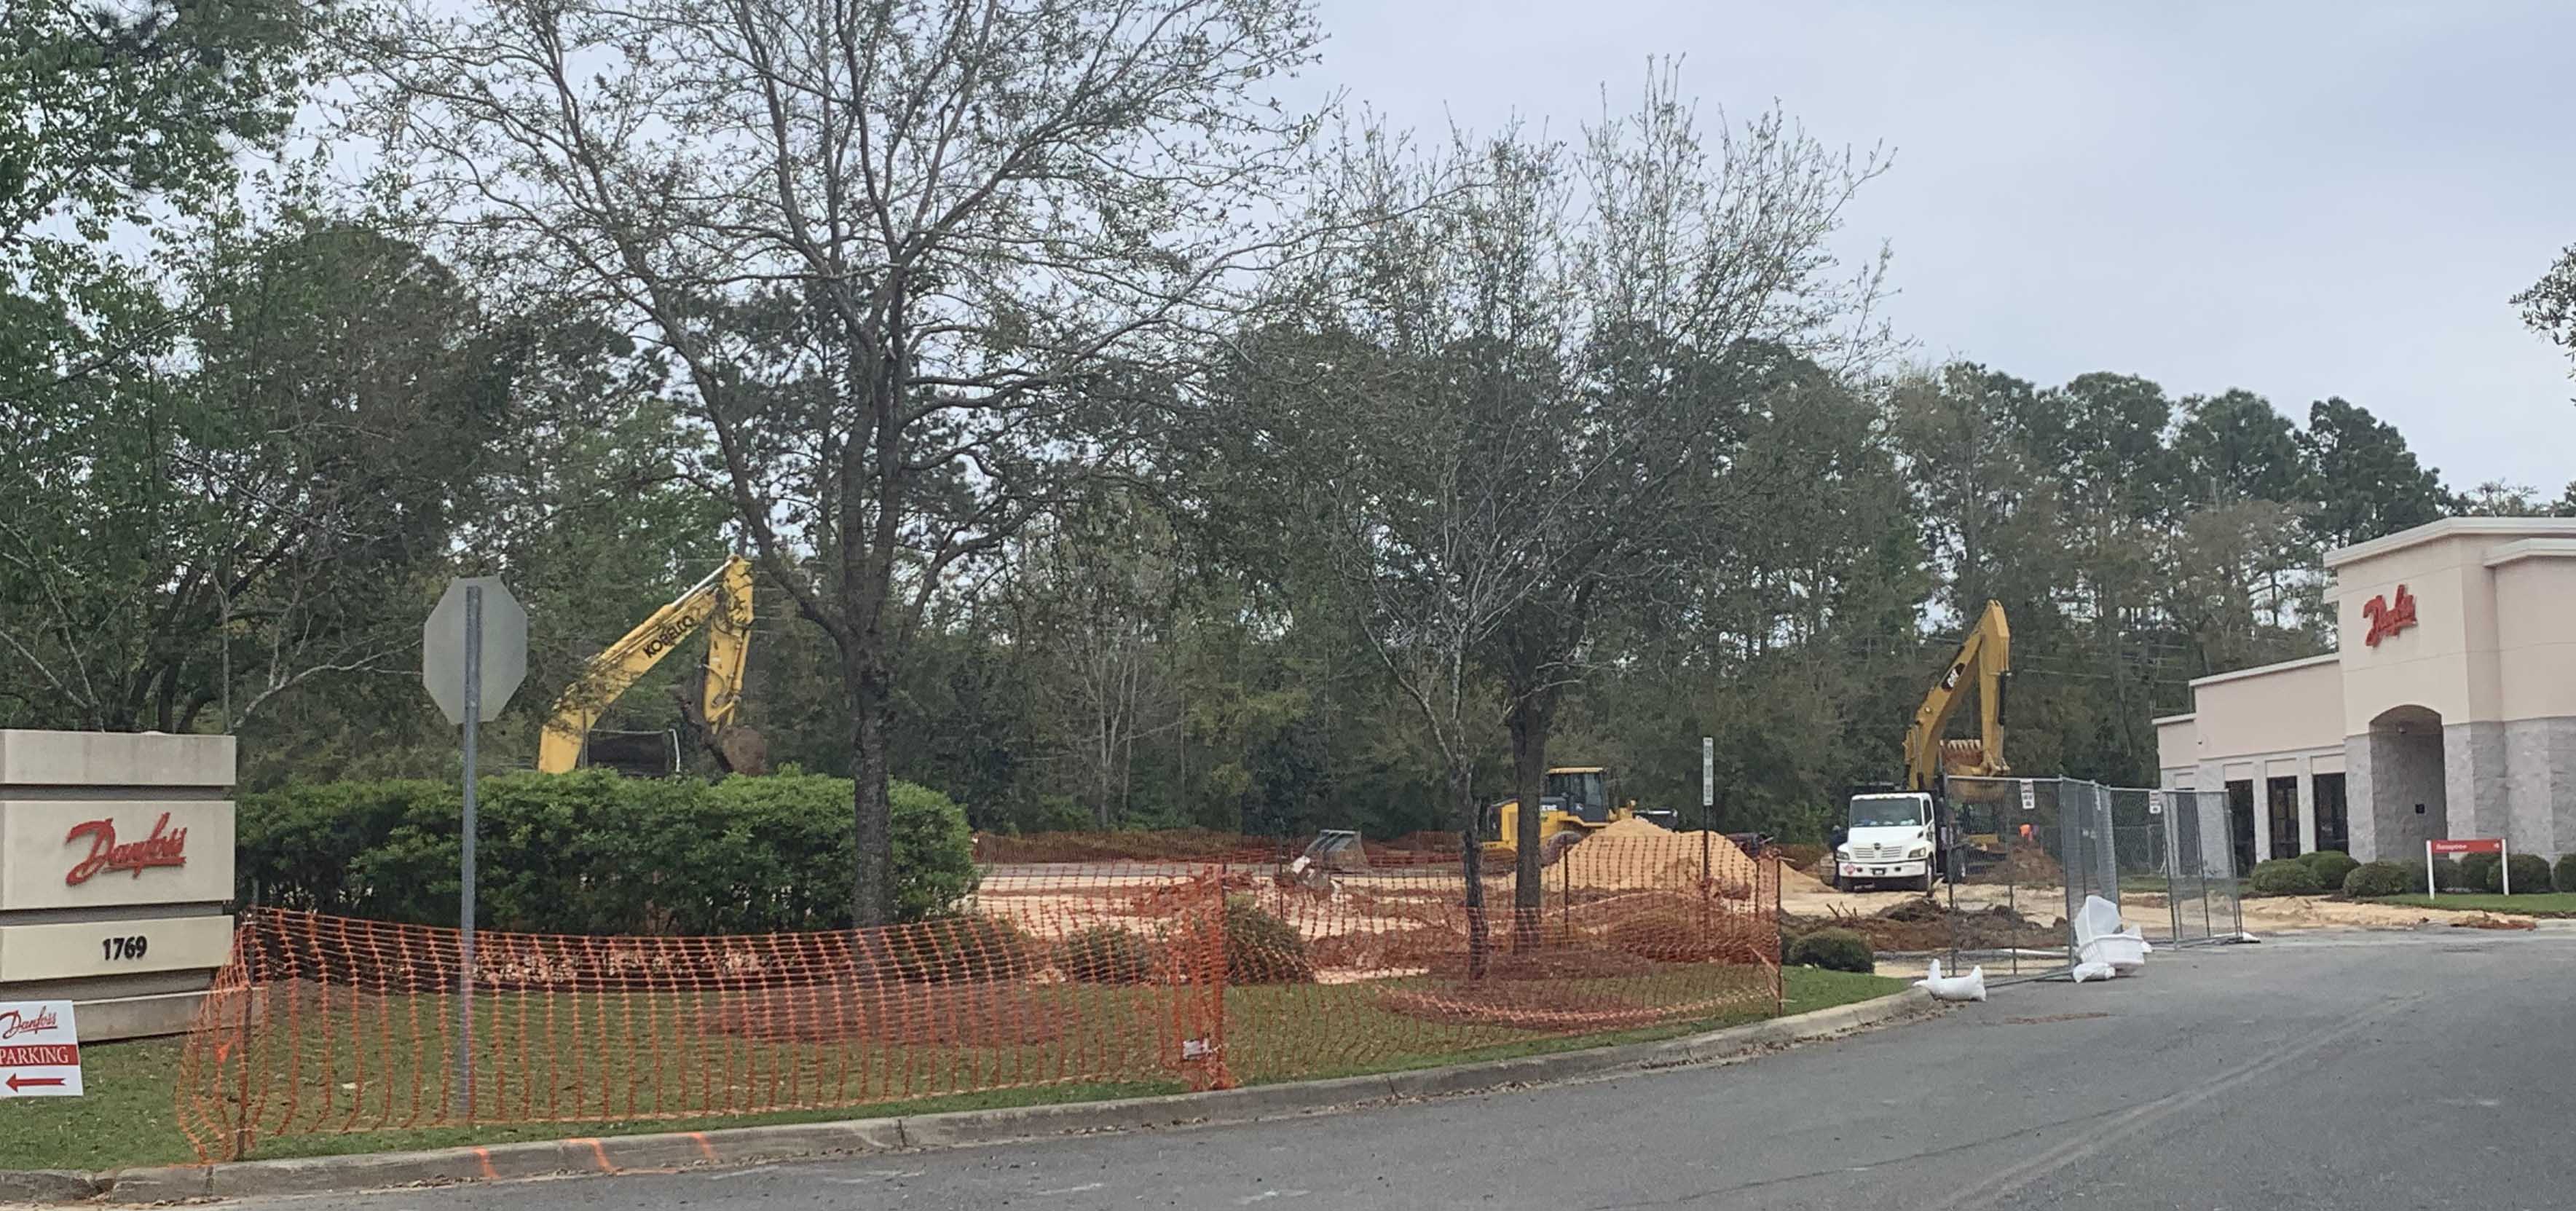 Danfoss Turbocor under construction in March of 2019 in Innovation Park of Tallahassee